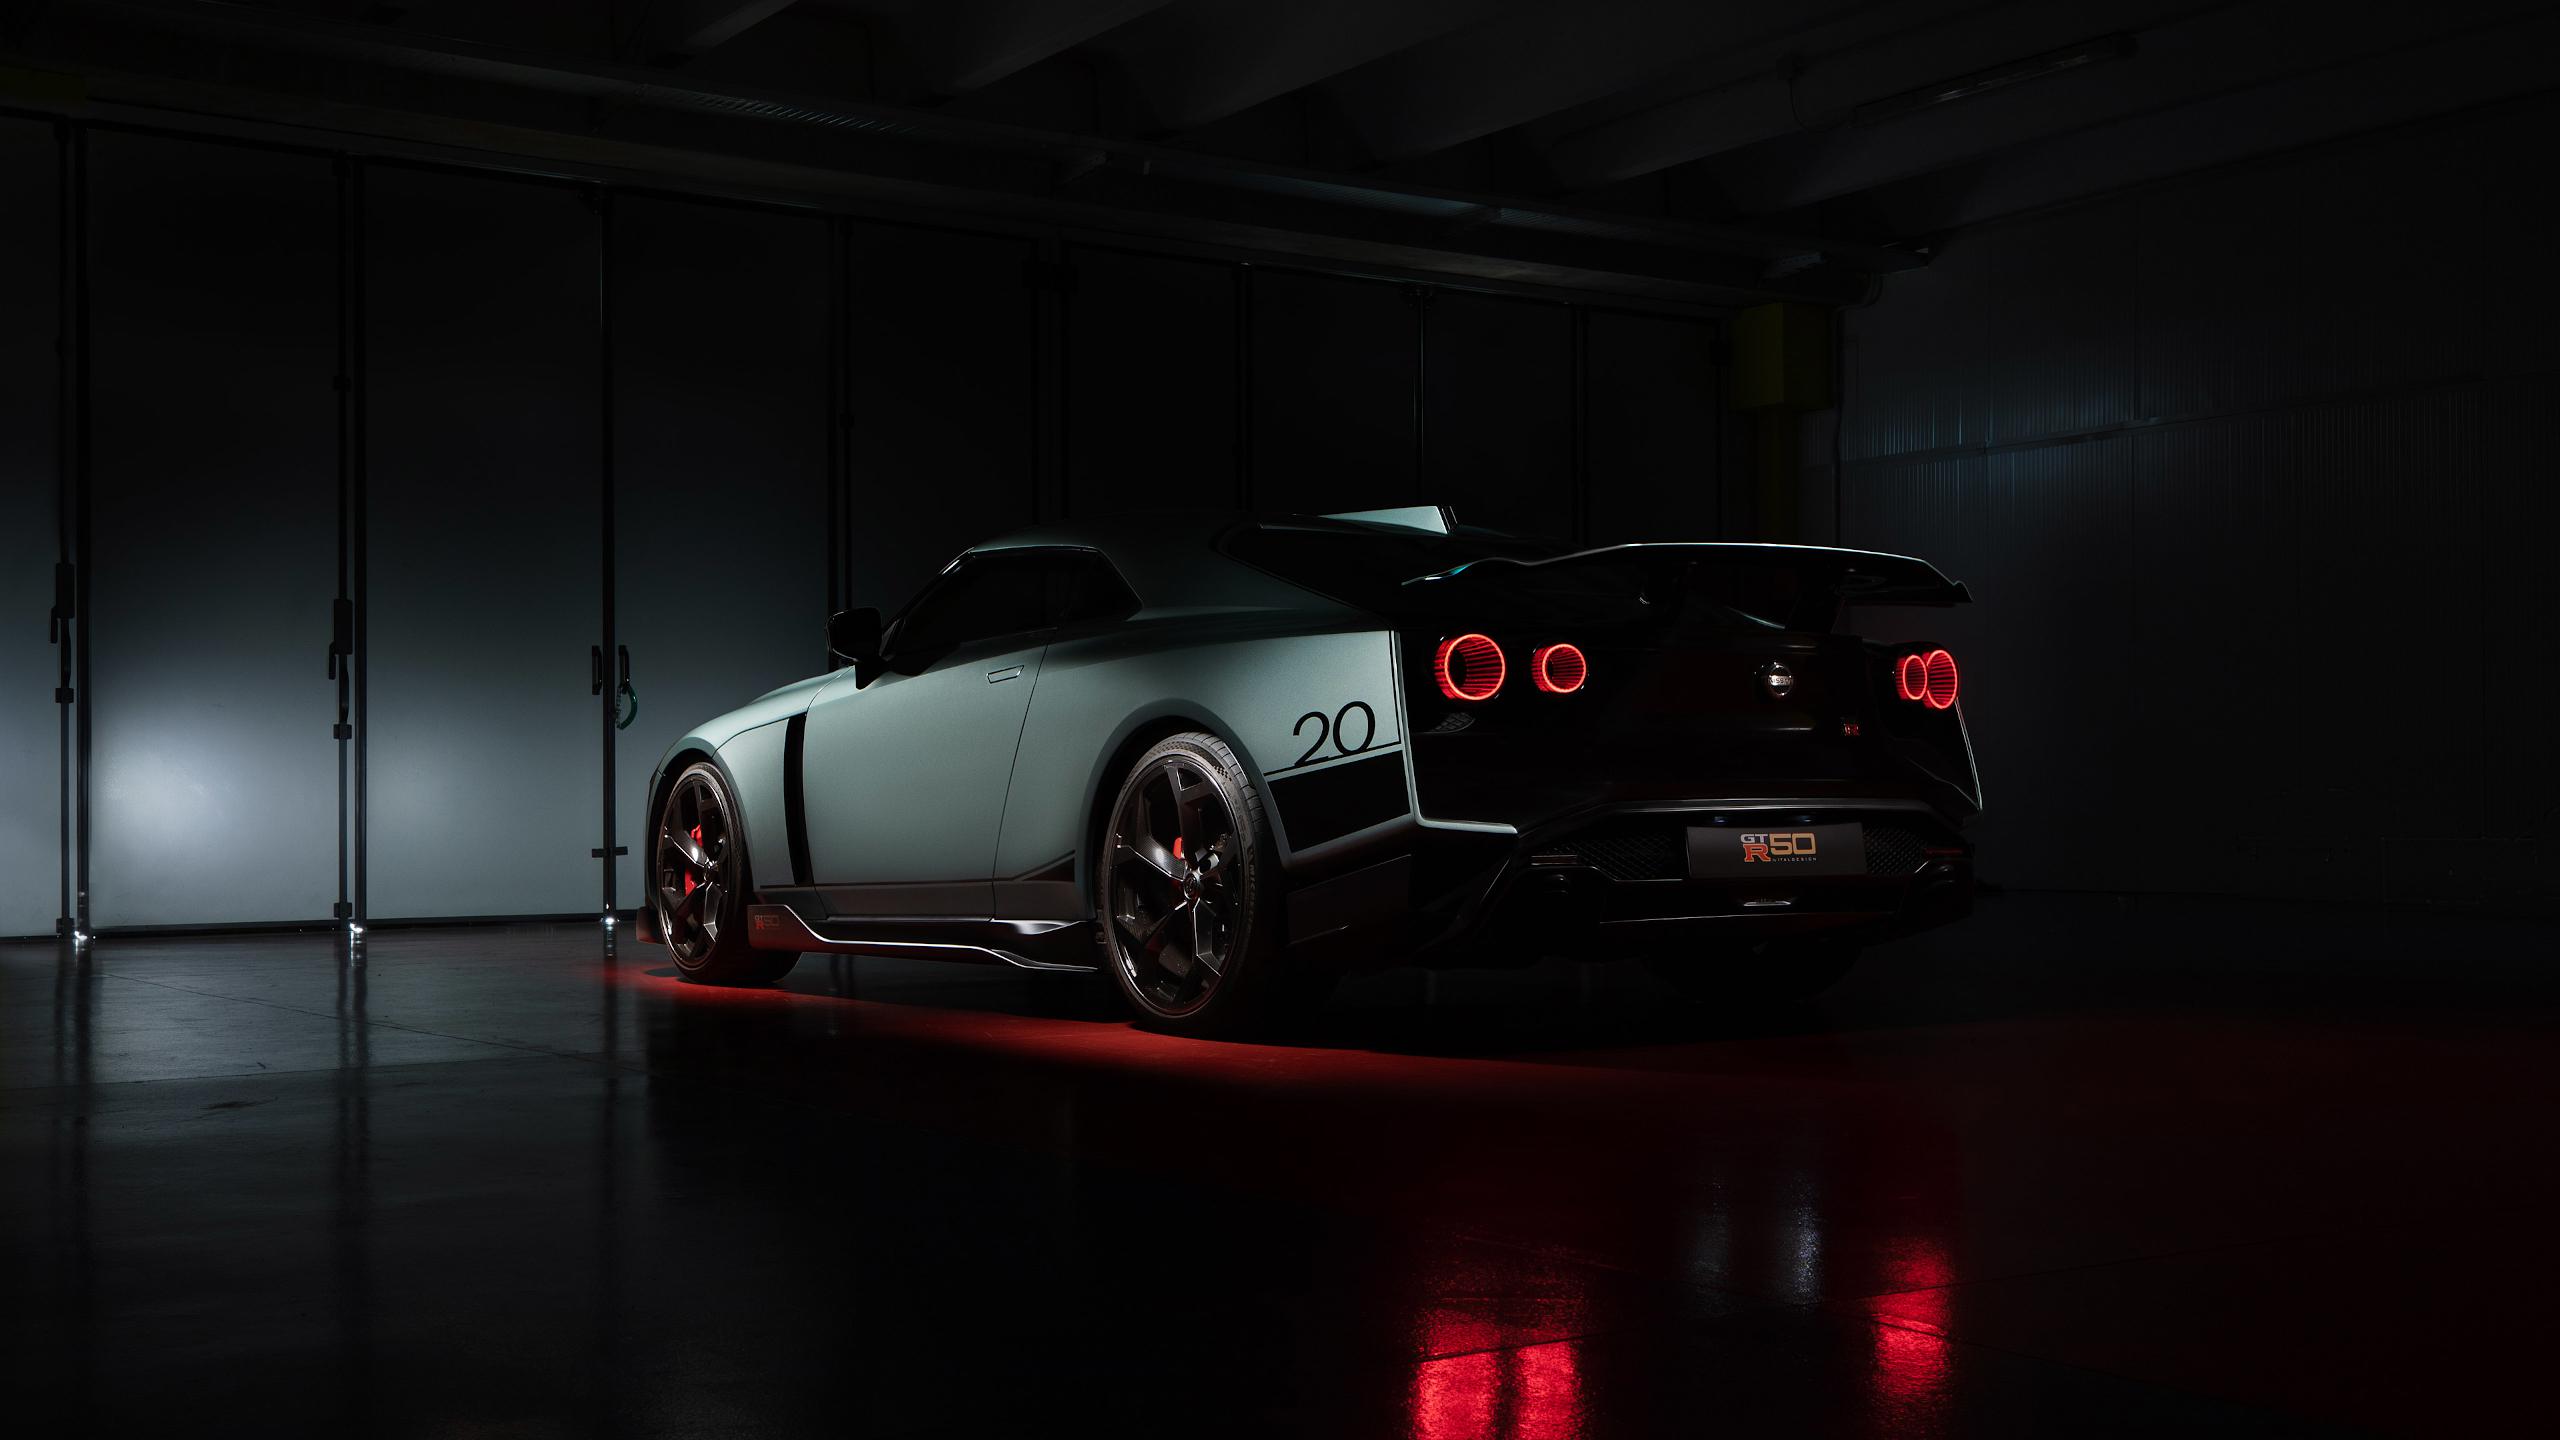 Nissan k wallpapers for your desktop or mobile screen free and easy to download